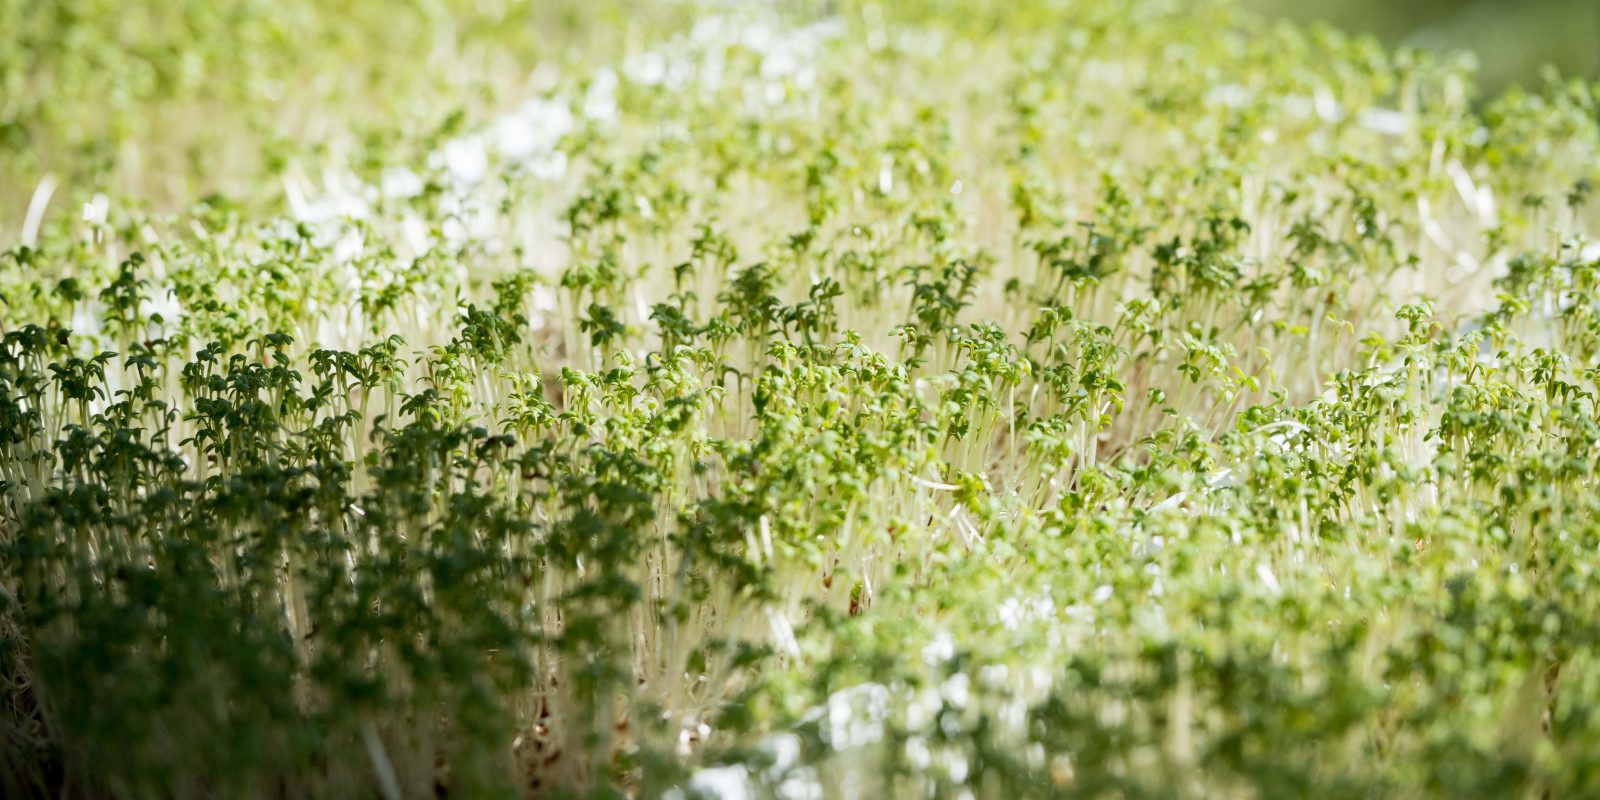 The nutrient-rich watercress is used in the company’s organic and natural skin care products. Photo by Leo Wesson